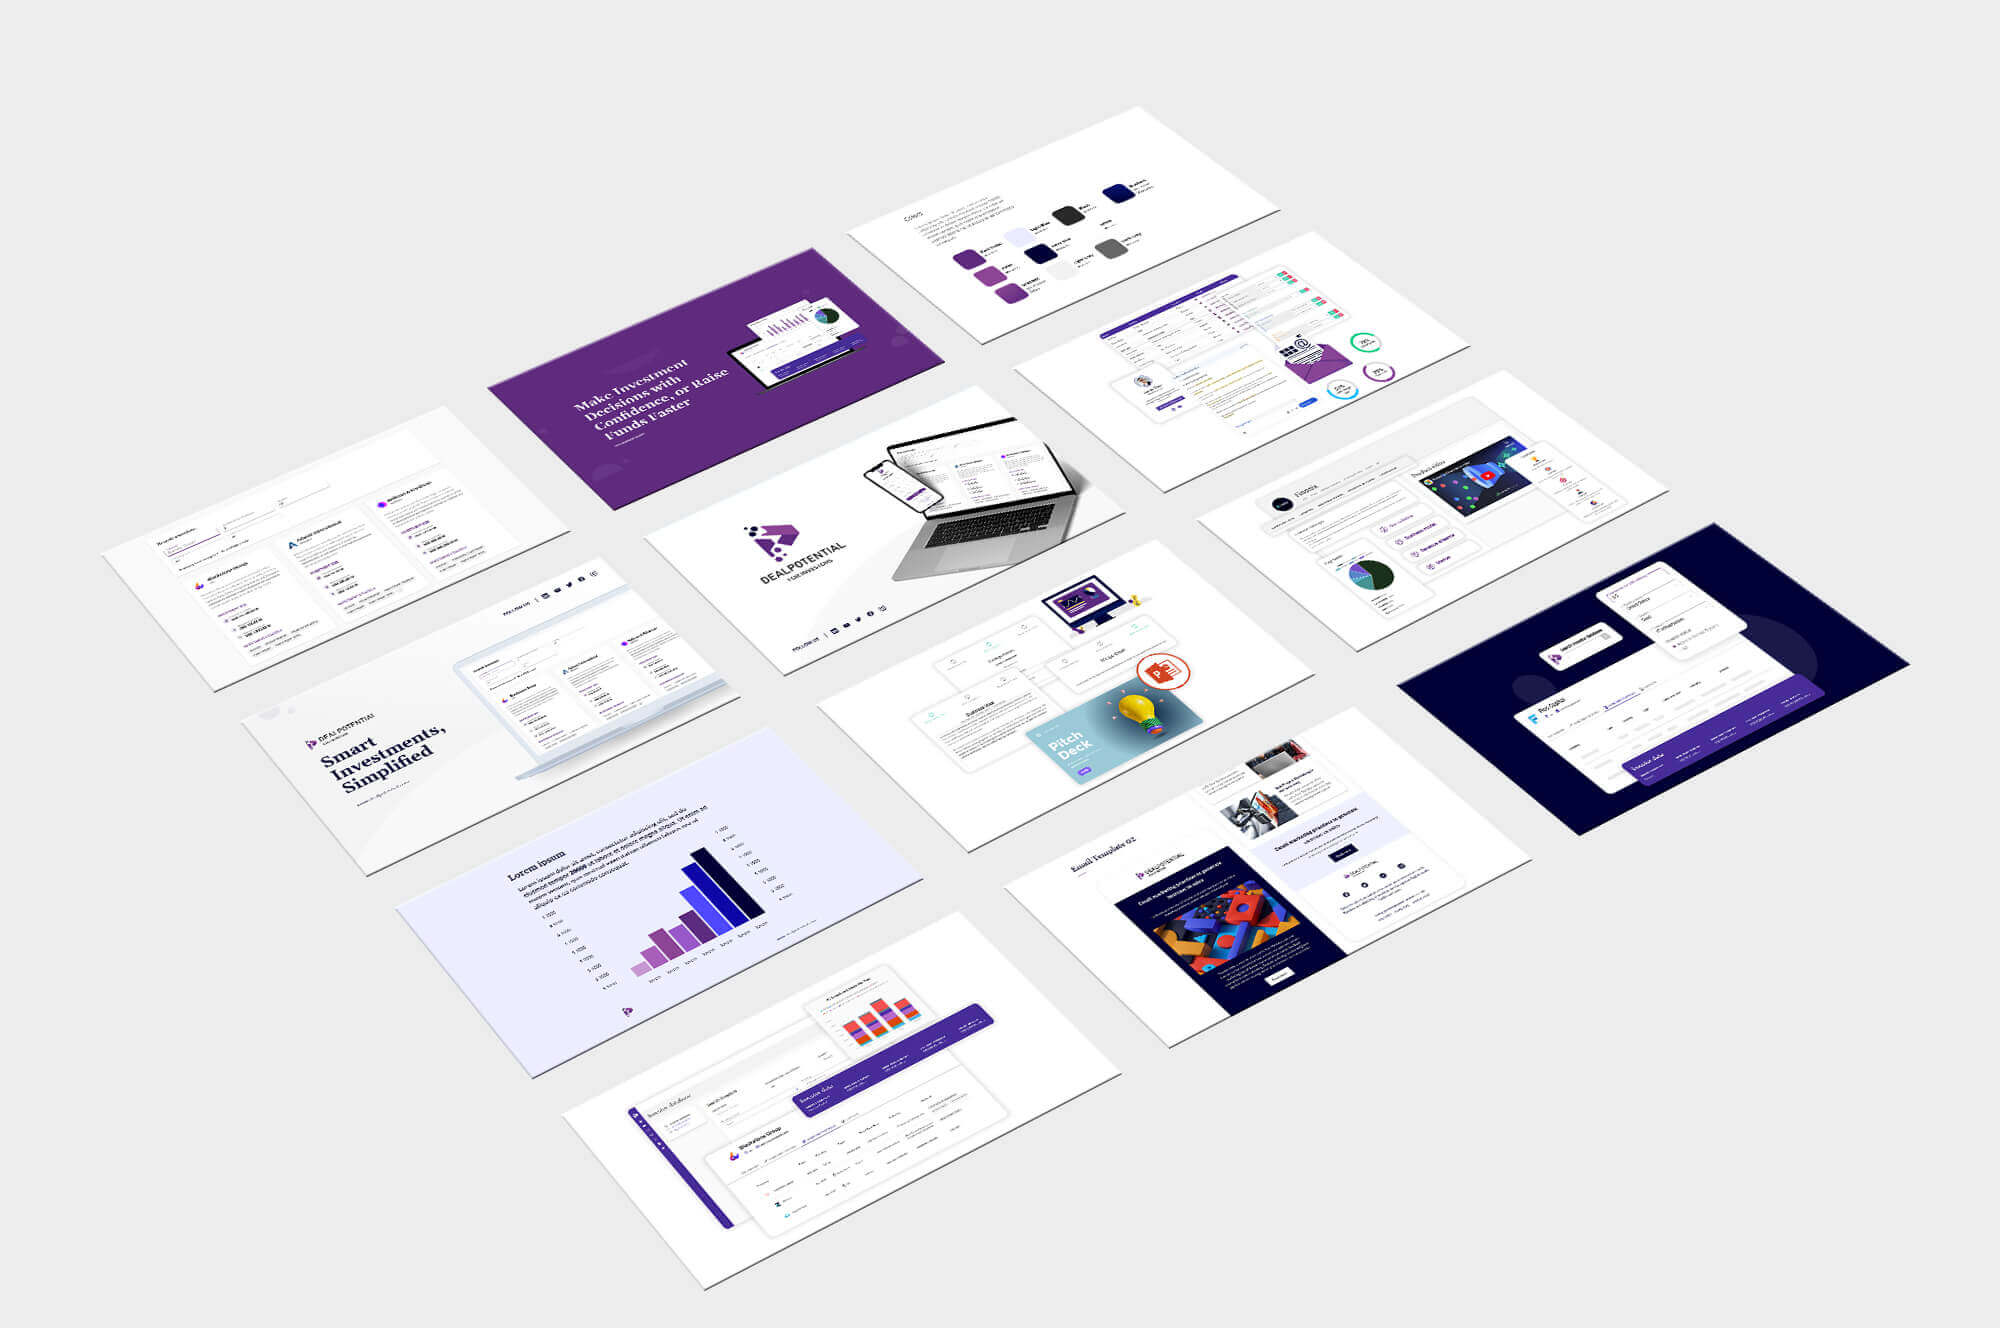 Isometric cards illustrating the diverse aspects of Nar Agency's SaaS Branding Design Service.